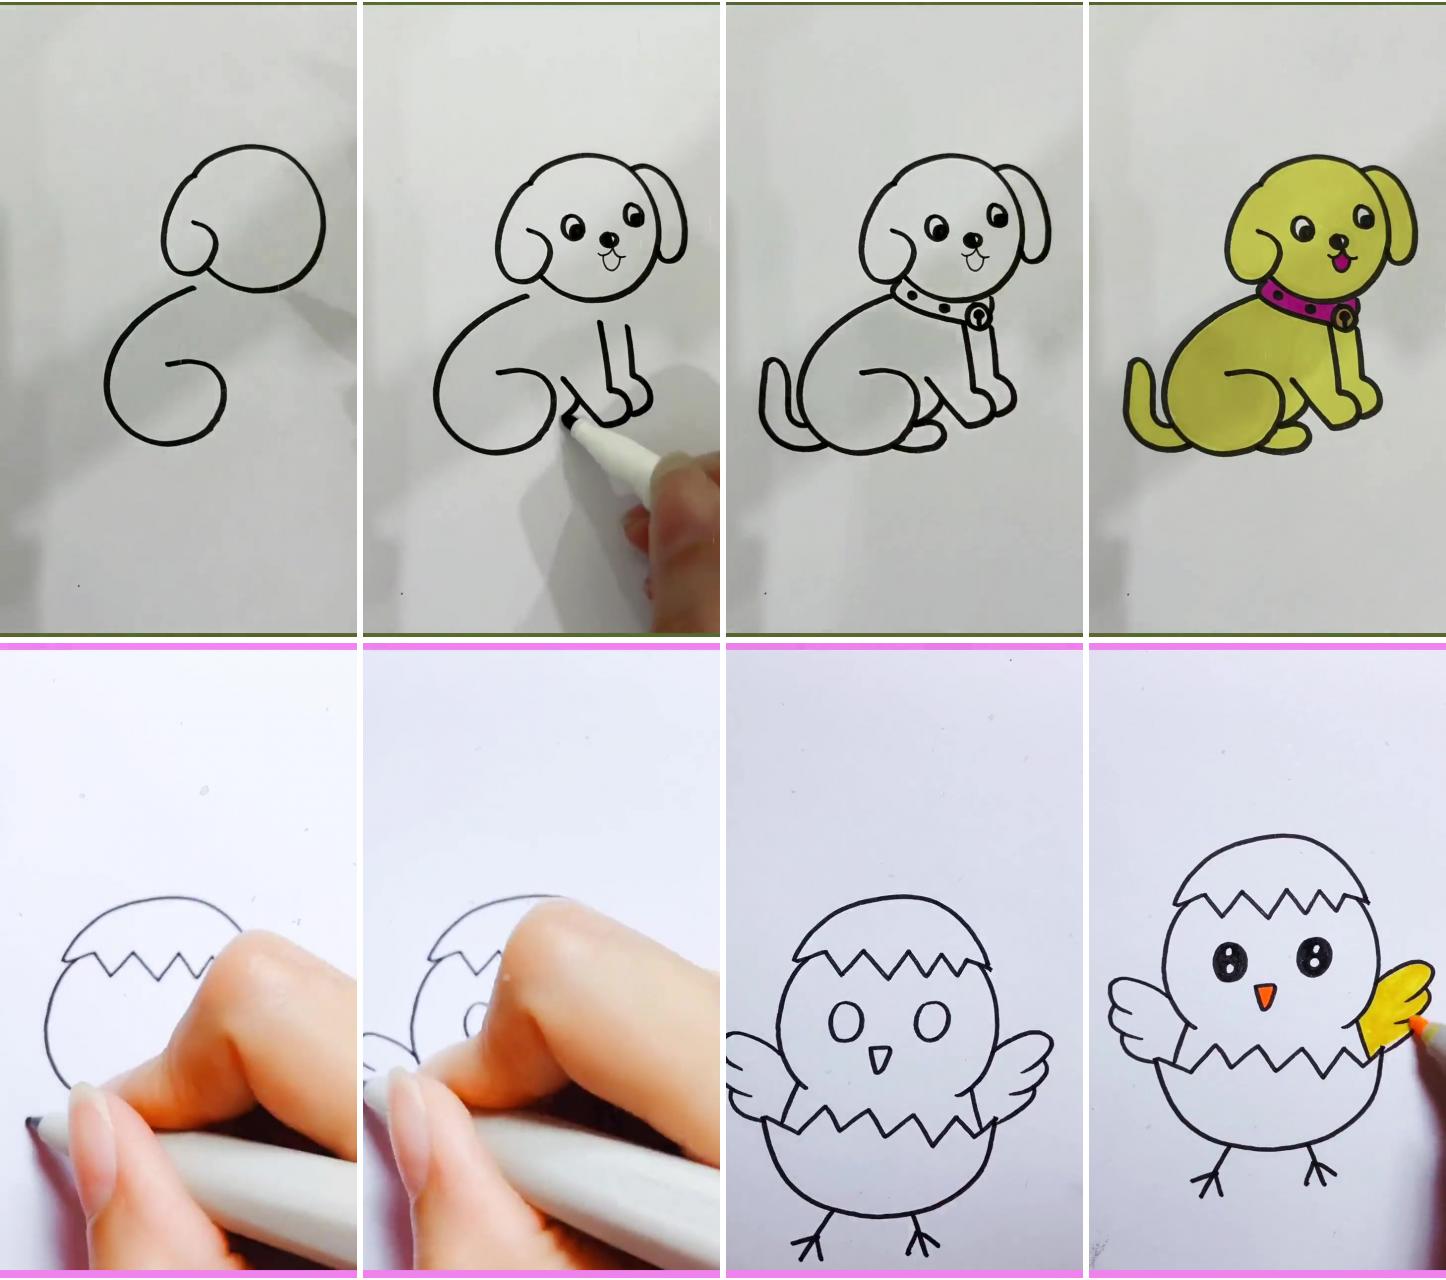 Easy how to draw a dog step by step tutorial | free pencil drawing class - how to draw a chicks